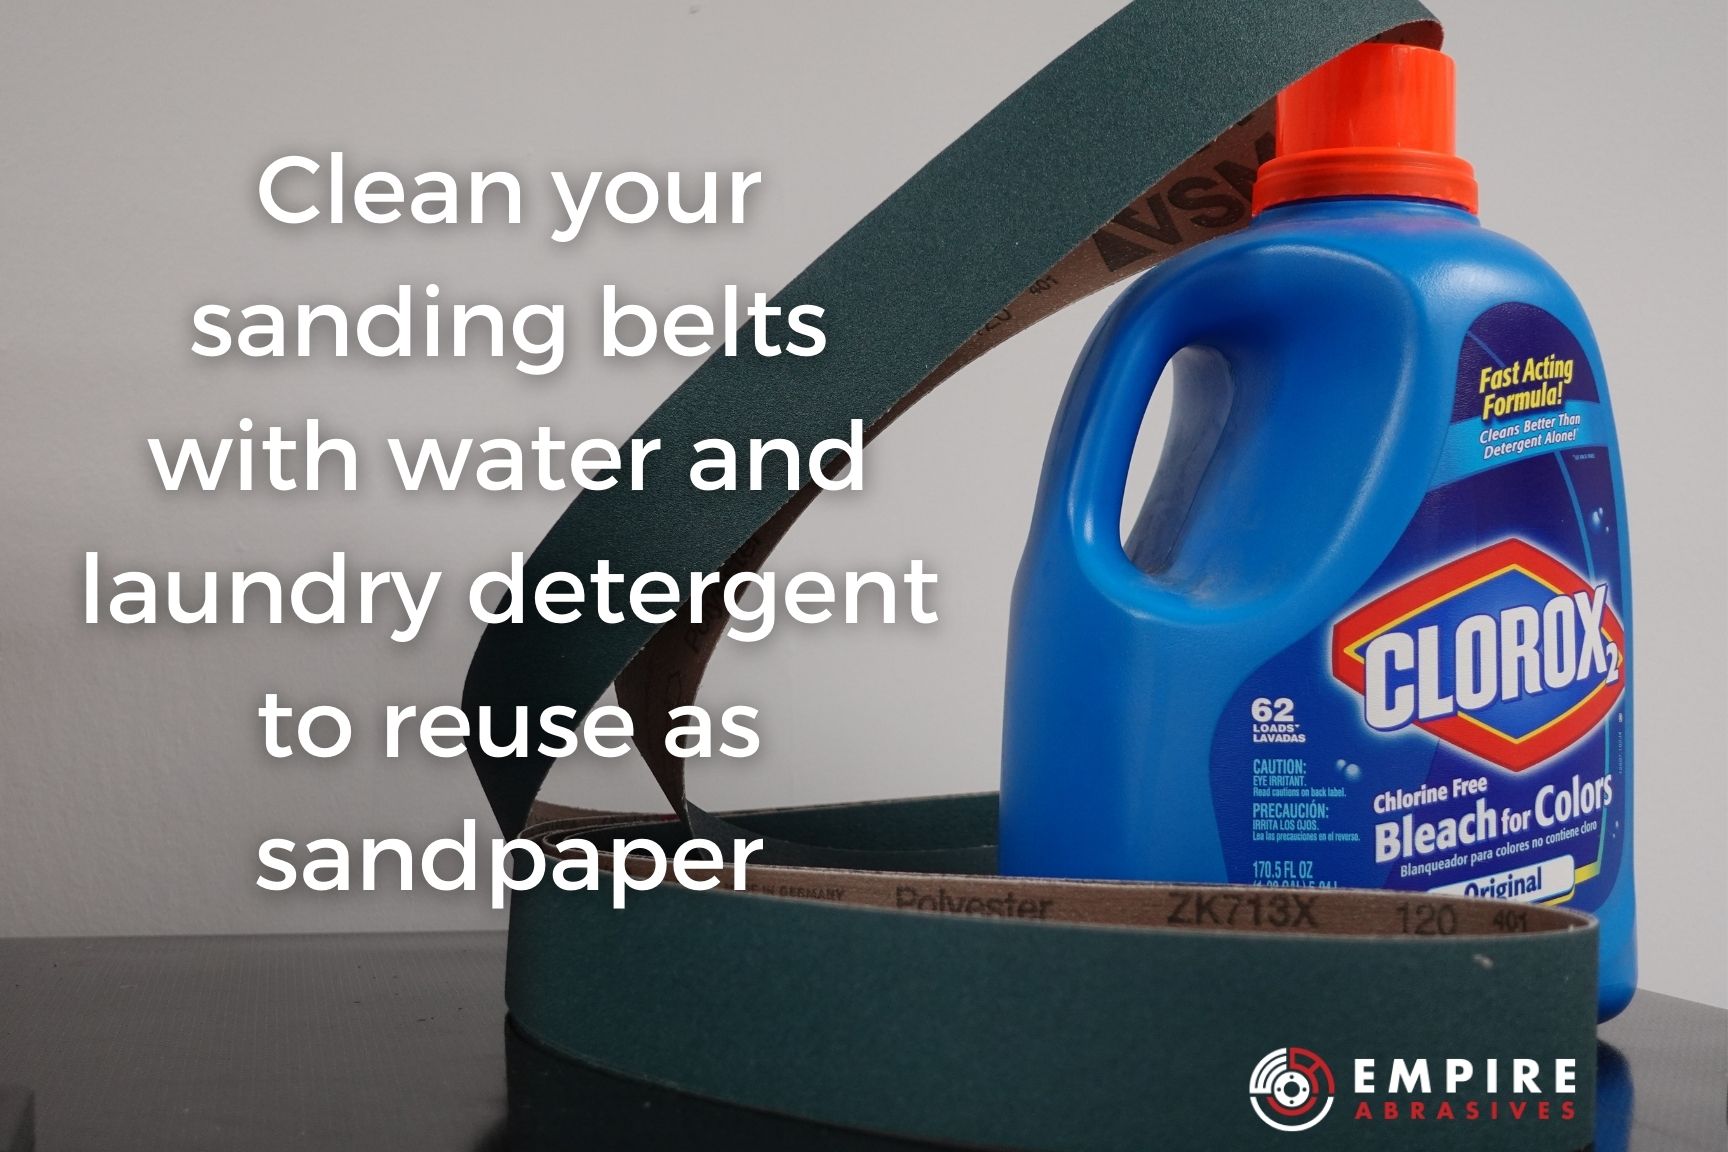 Clean your sanding belts with water and laundry detergent